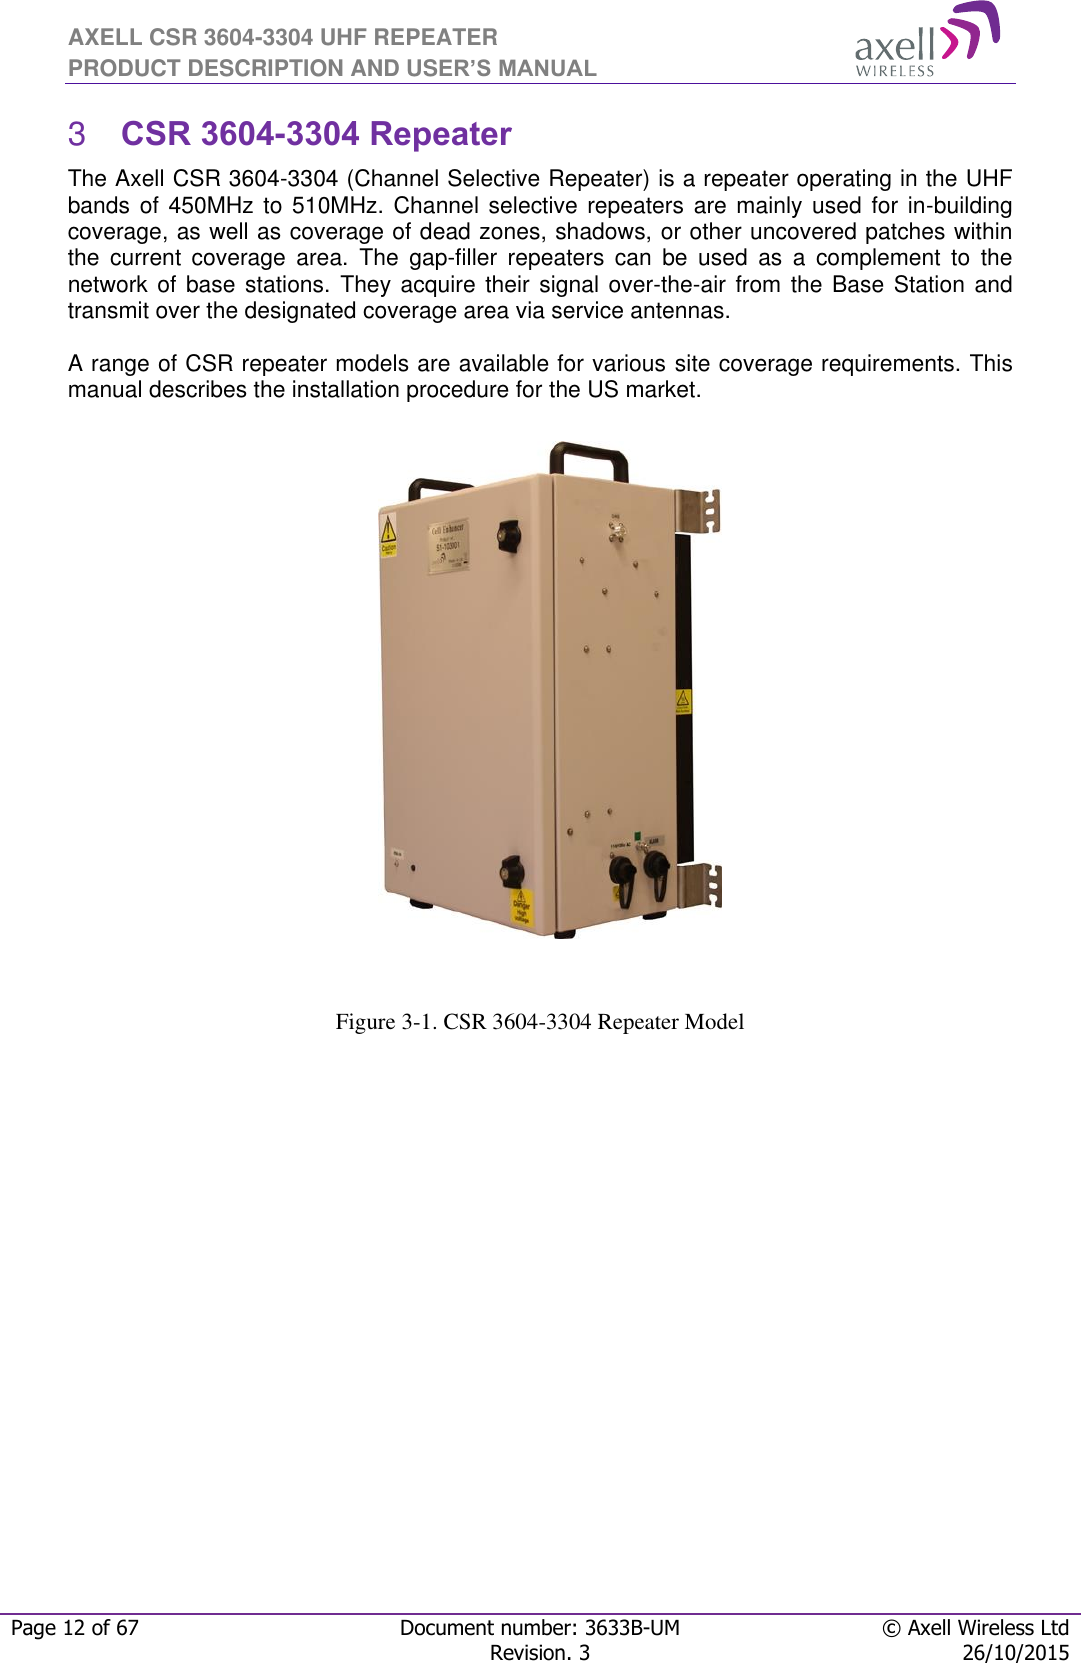 AXELL CSR 3604-3304 UHF REPEATER PRODUCT DESCRIPTION AND USER’S MANUAL  Page 12 of 67 Document number: 3633B-UM © Axell Wireless Ltd  Revision. 3 26/10/2015   CSR 3604-3304 Repeater  3The Axell CSR 3604-3304 (Channel Selective Repeater) is a repeater operating in the UHF bands of  450MHz  to 510MHz.  Channel  selective repeaters are mainly  used  for in-building coverage, as well as coverage of dead zones, shadows, or other uncovered patches within the  current  coverage  area.  The  gap-filler  repeaters  can  be  used  as  a  complement  to  the network of base stations. They acquire their signal  over-the-air from the Base Station and transmit over the designated coverage area via service antennas.   A range of CSR repeater models are available for various site coverage requirements. This manual describes the installation procedure for the US market.                        Figure 3-1. CSR 3604-3304 Repeater Model 